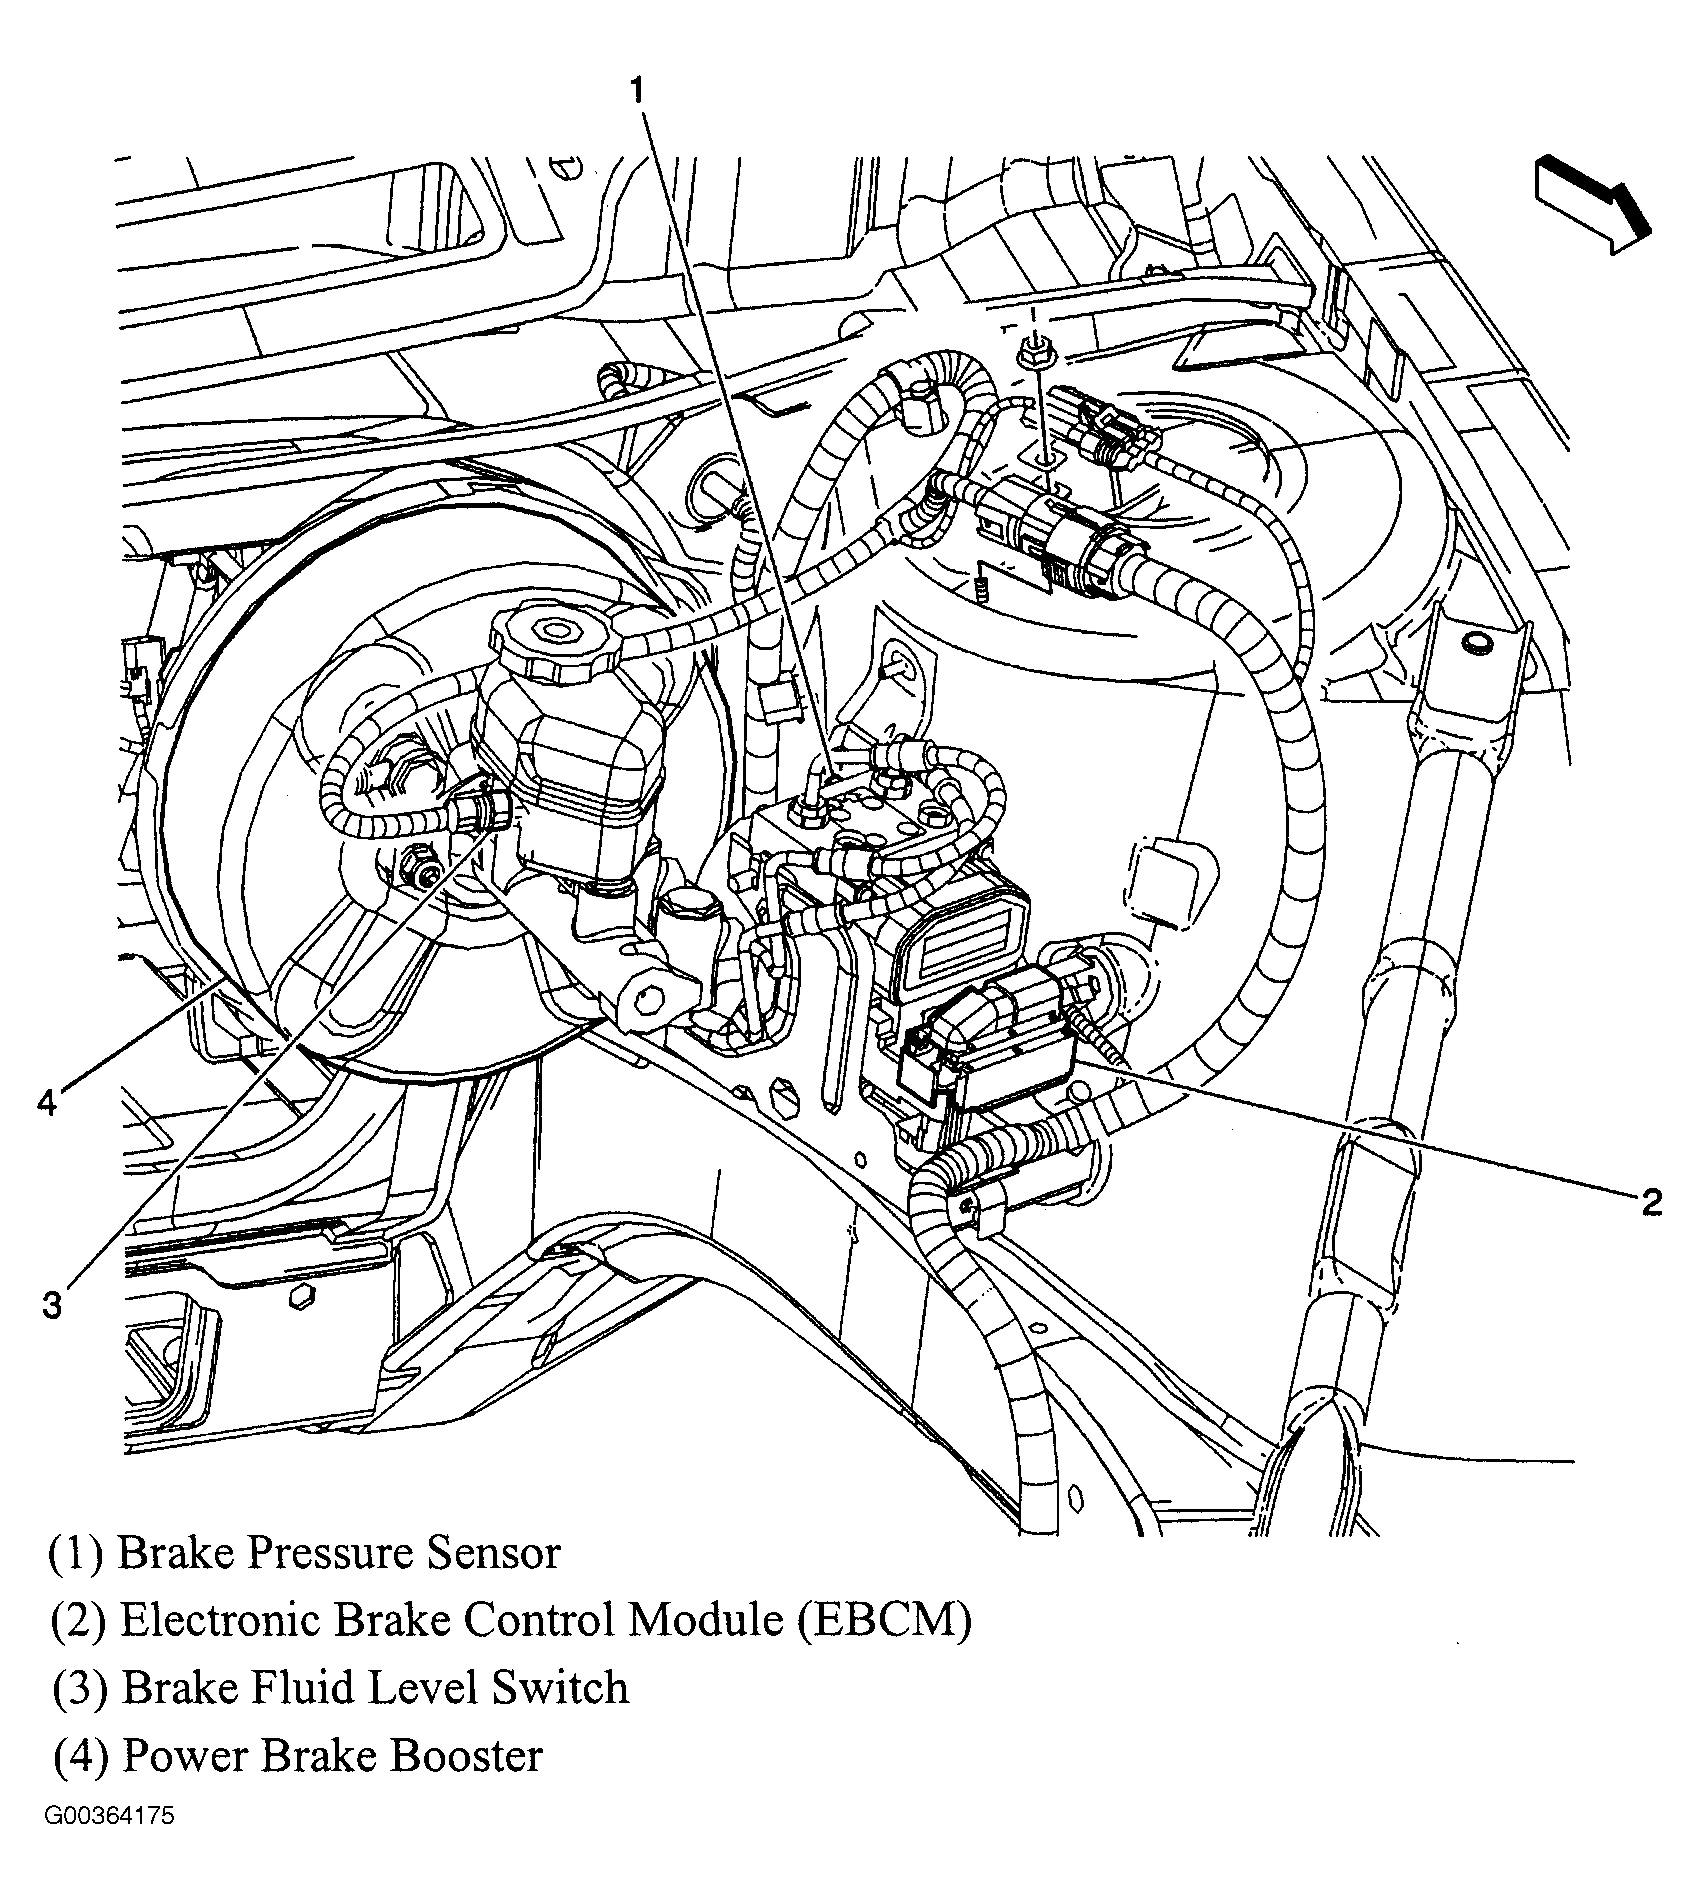 Buick LaCrosse CXS 2005 - Component Locations -  Left Rear Of Engine Compartment